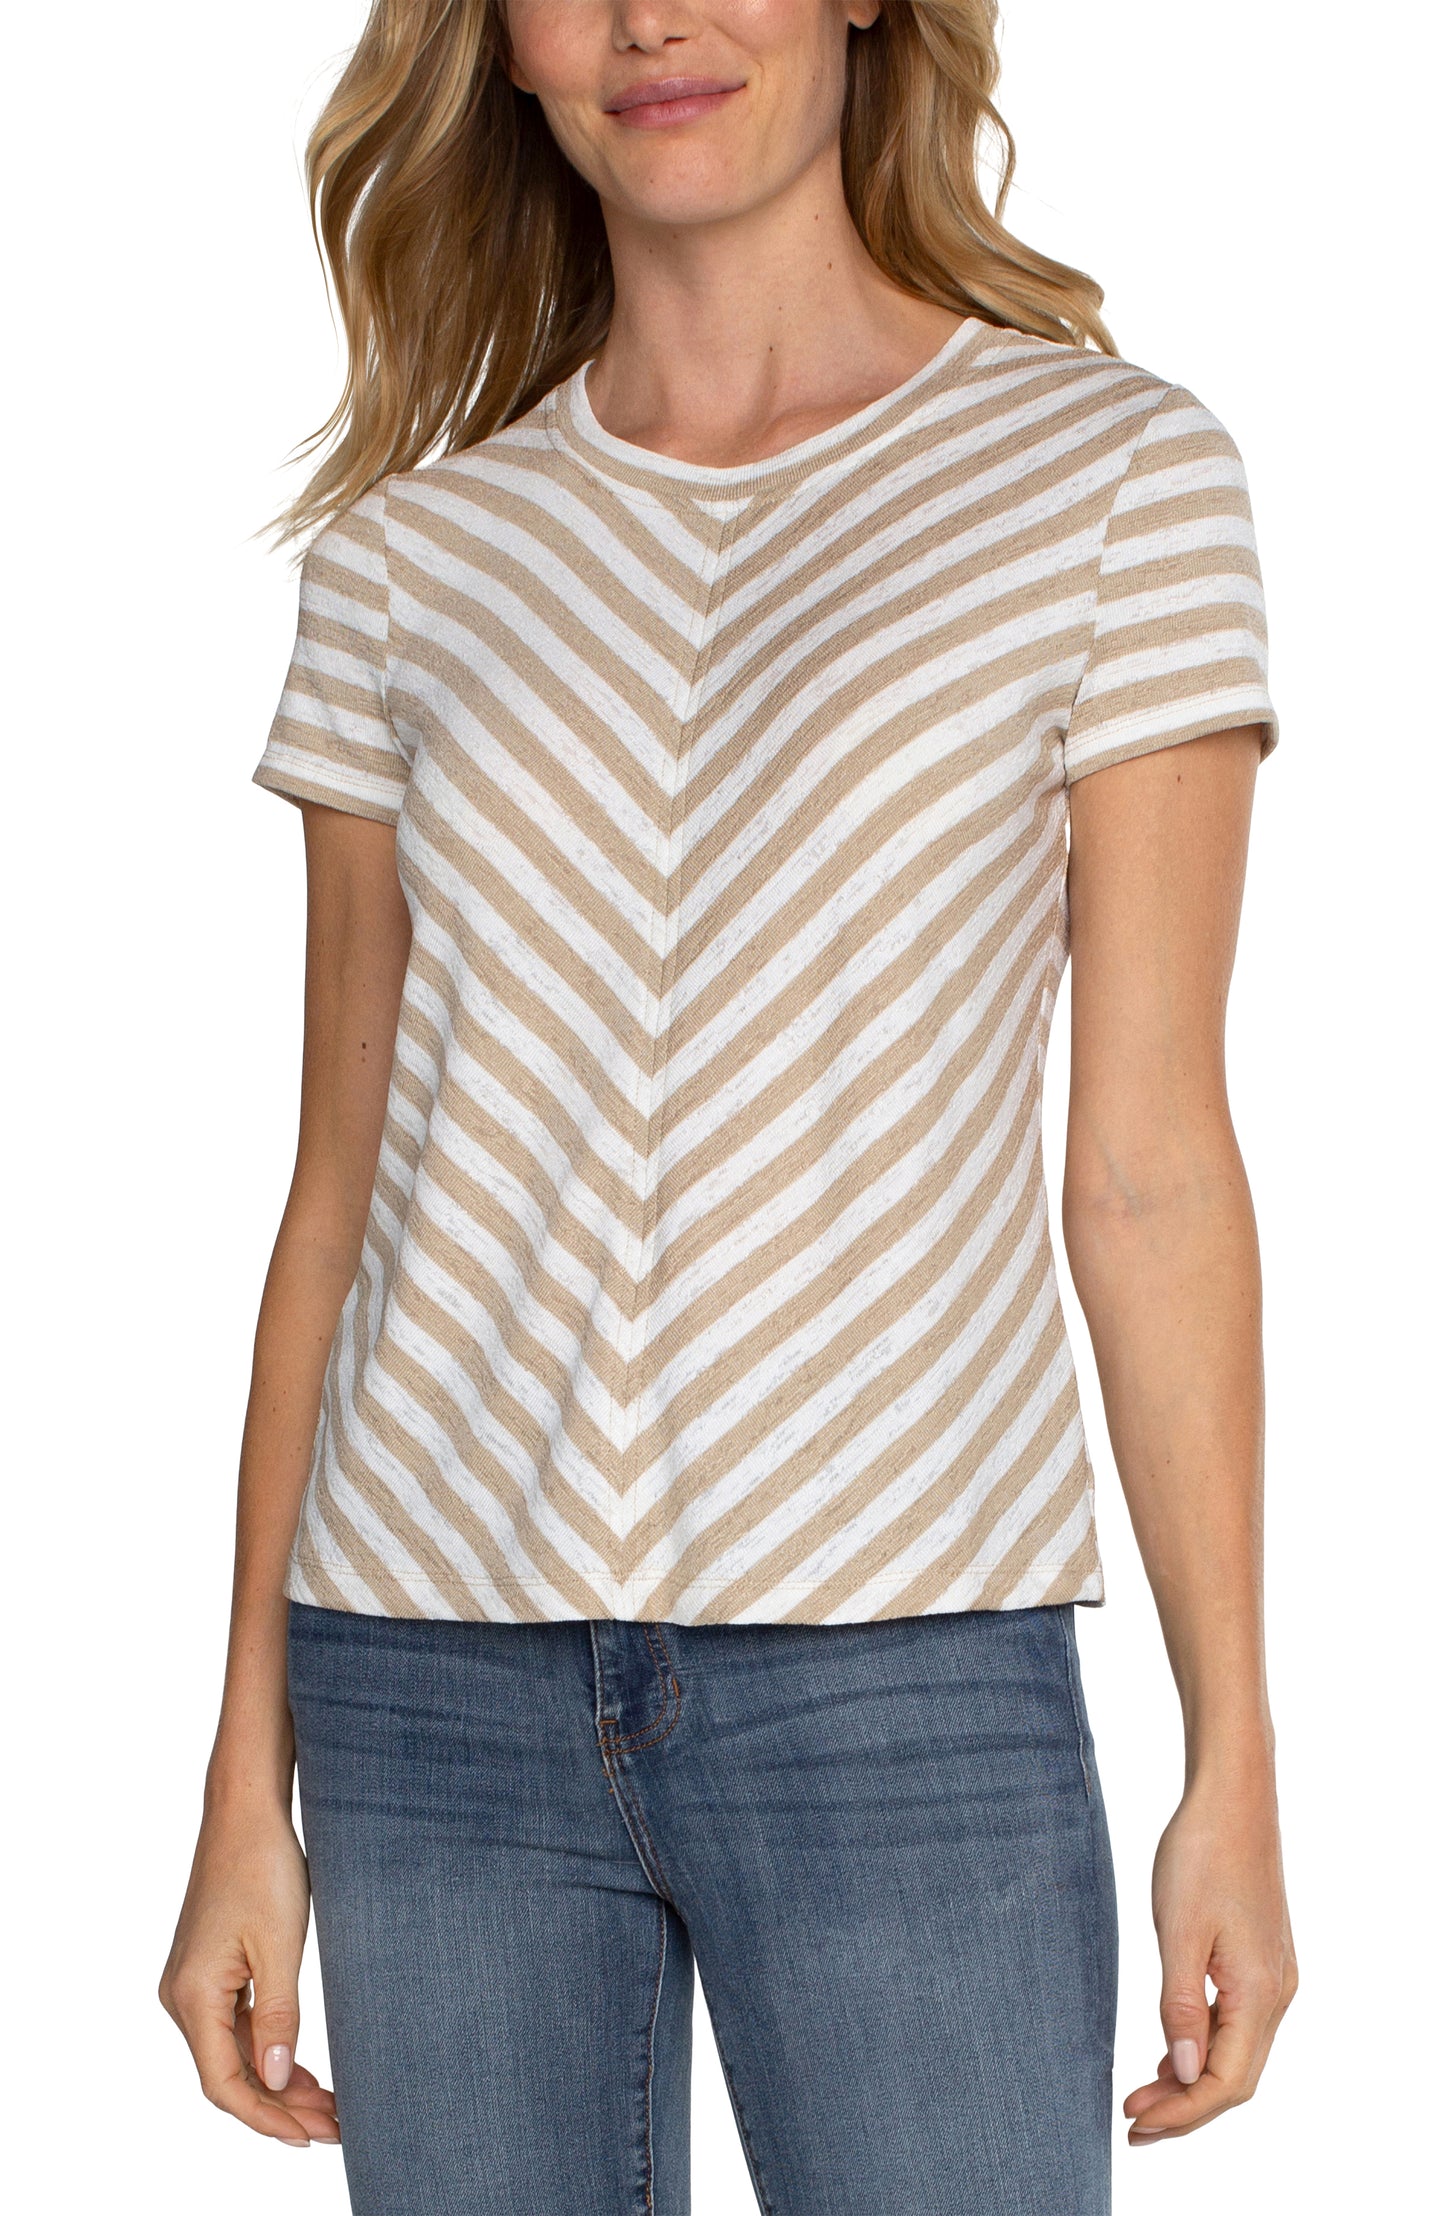 Liverpool Short Sleeve Knit Top with Tan Stripes (cream with tan stripes)